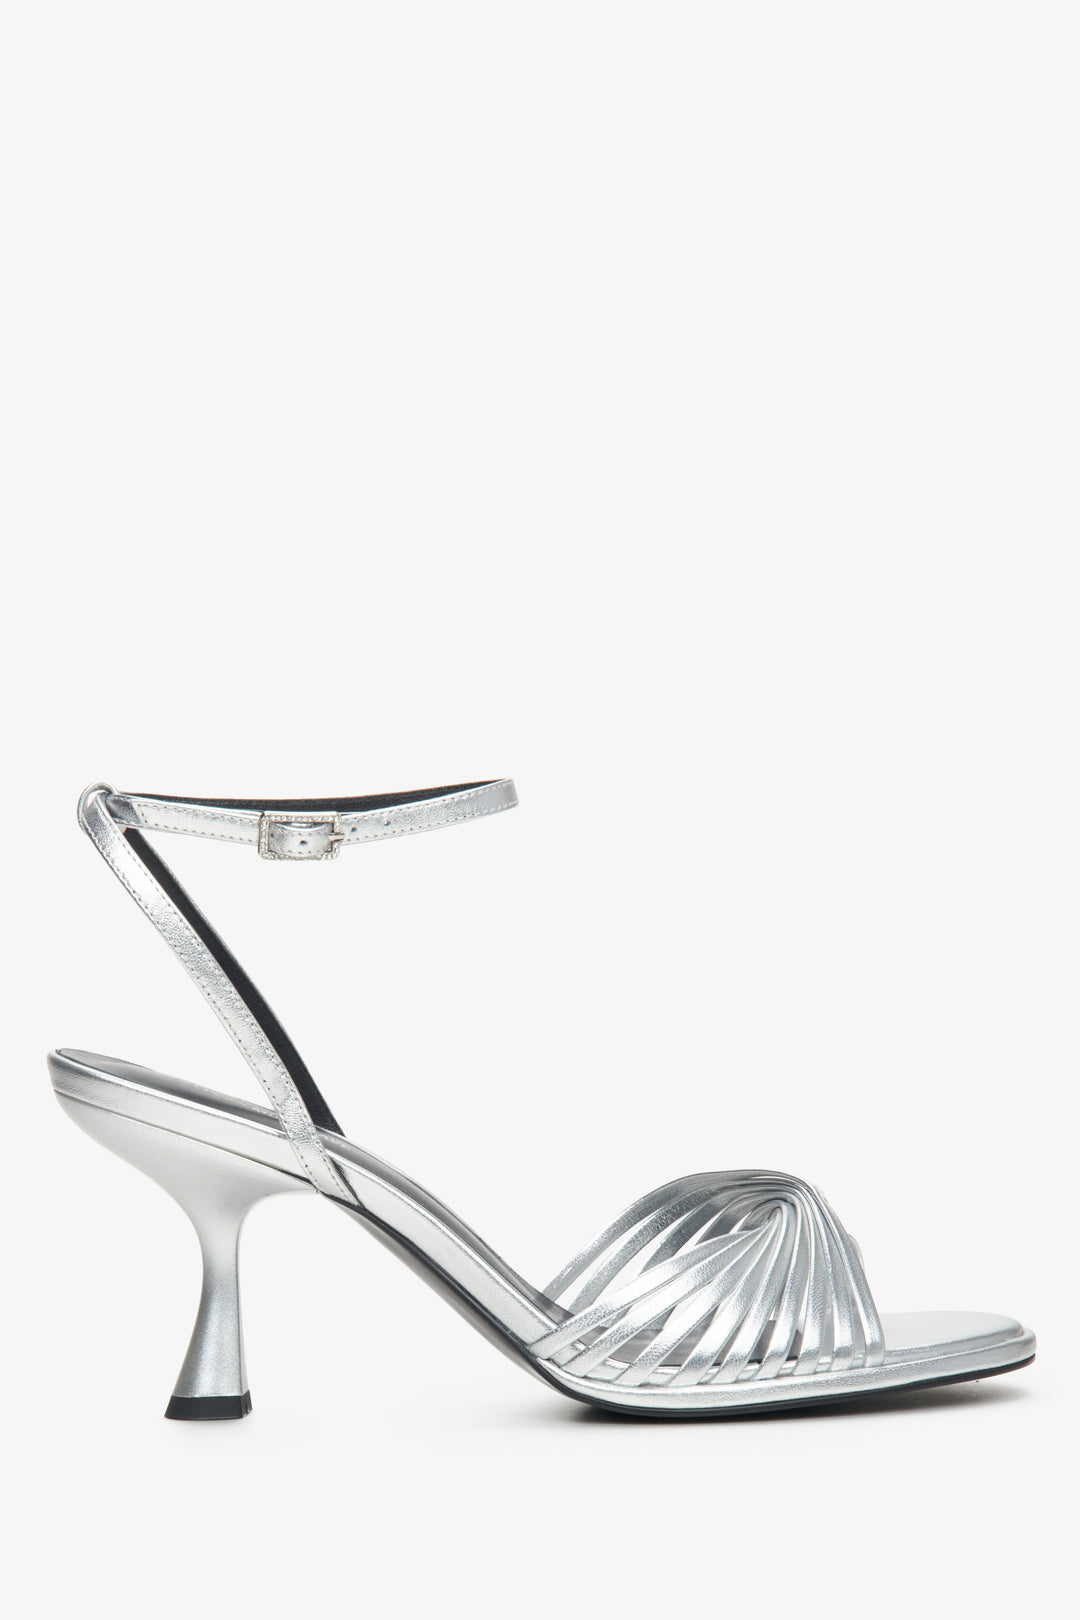 Women's leather sandals with silver heels - side profile of the shoe.